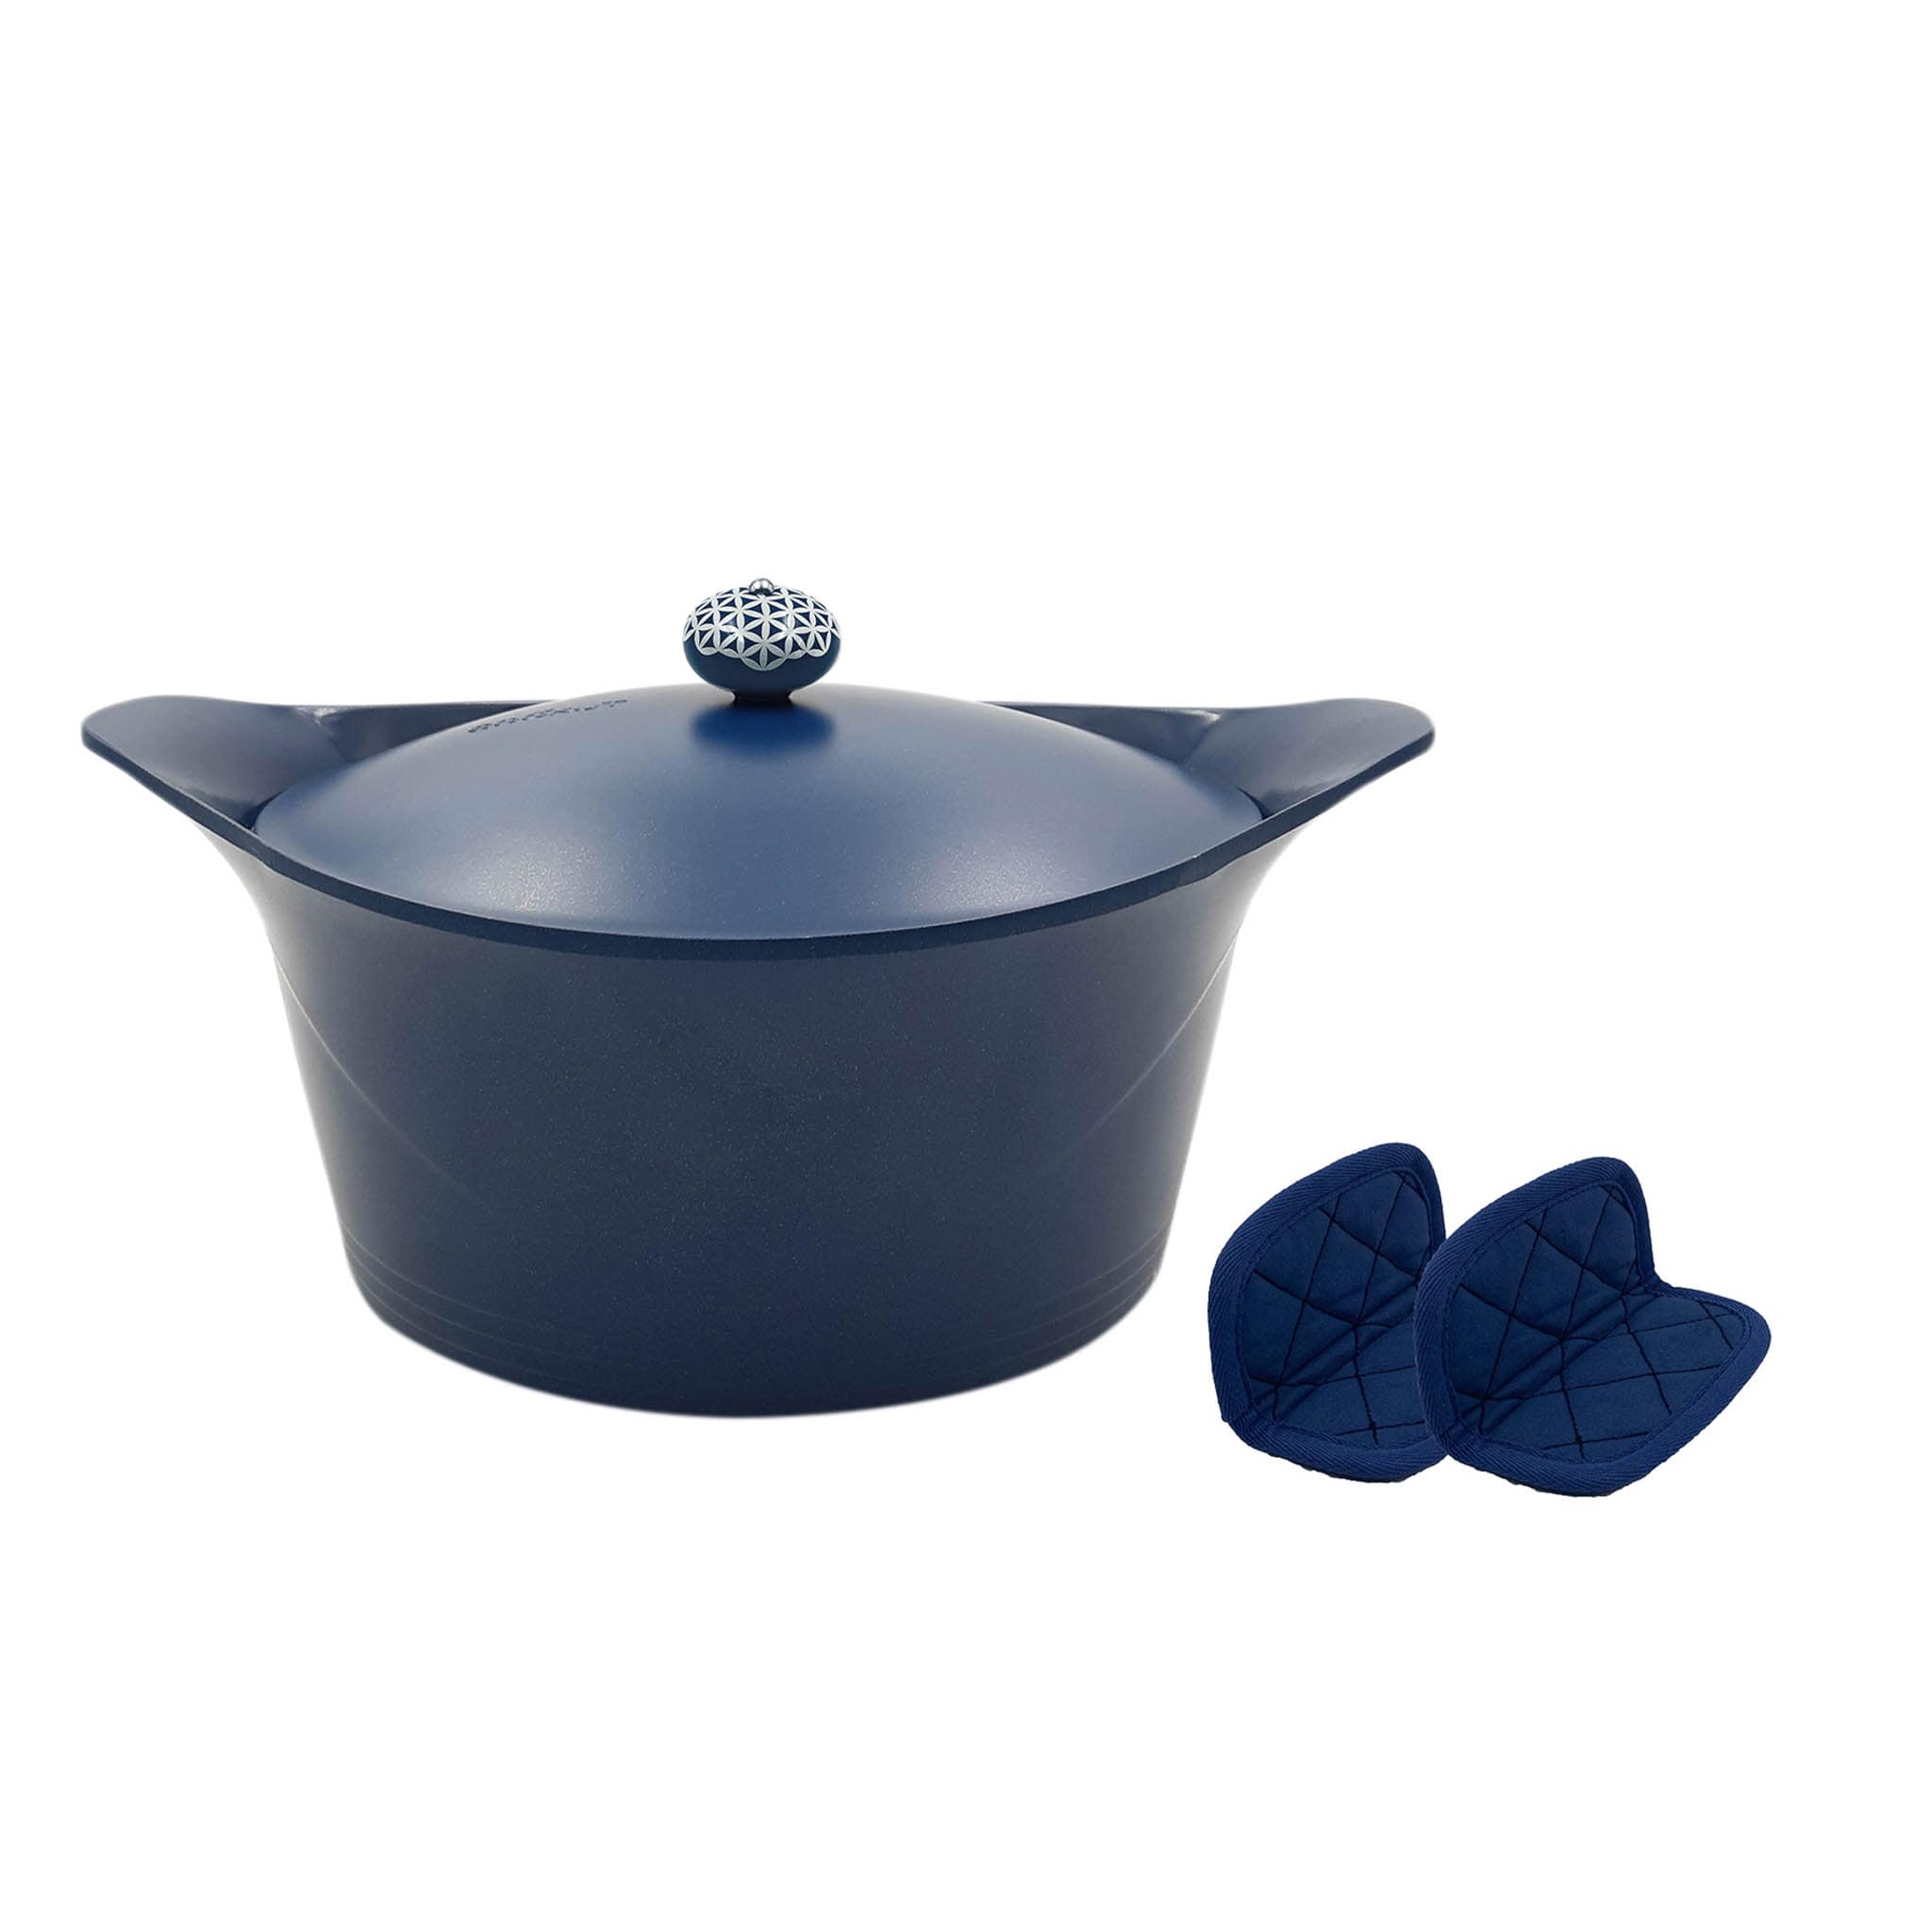 Cookut Multifunction Dutch Oven with Pot Holders, Blue